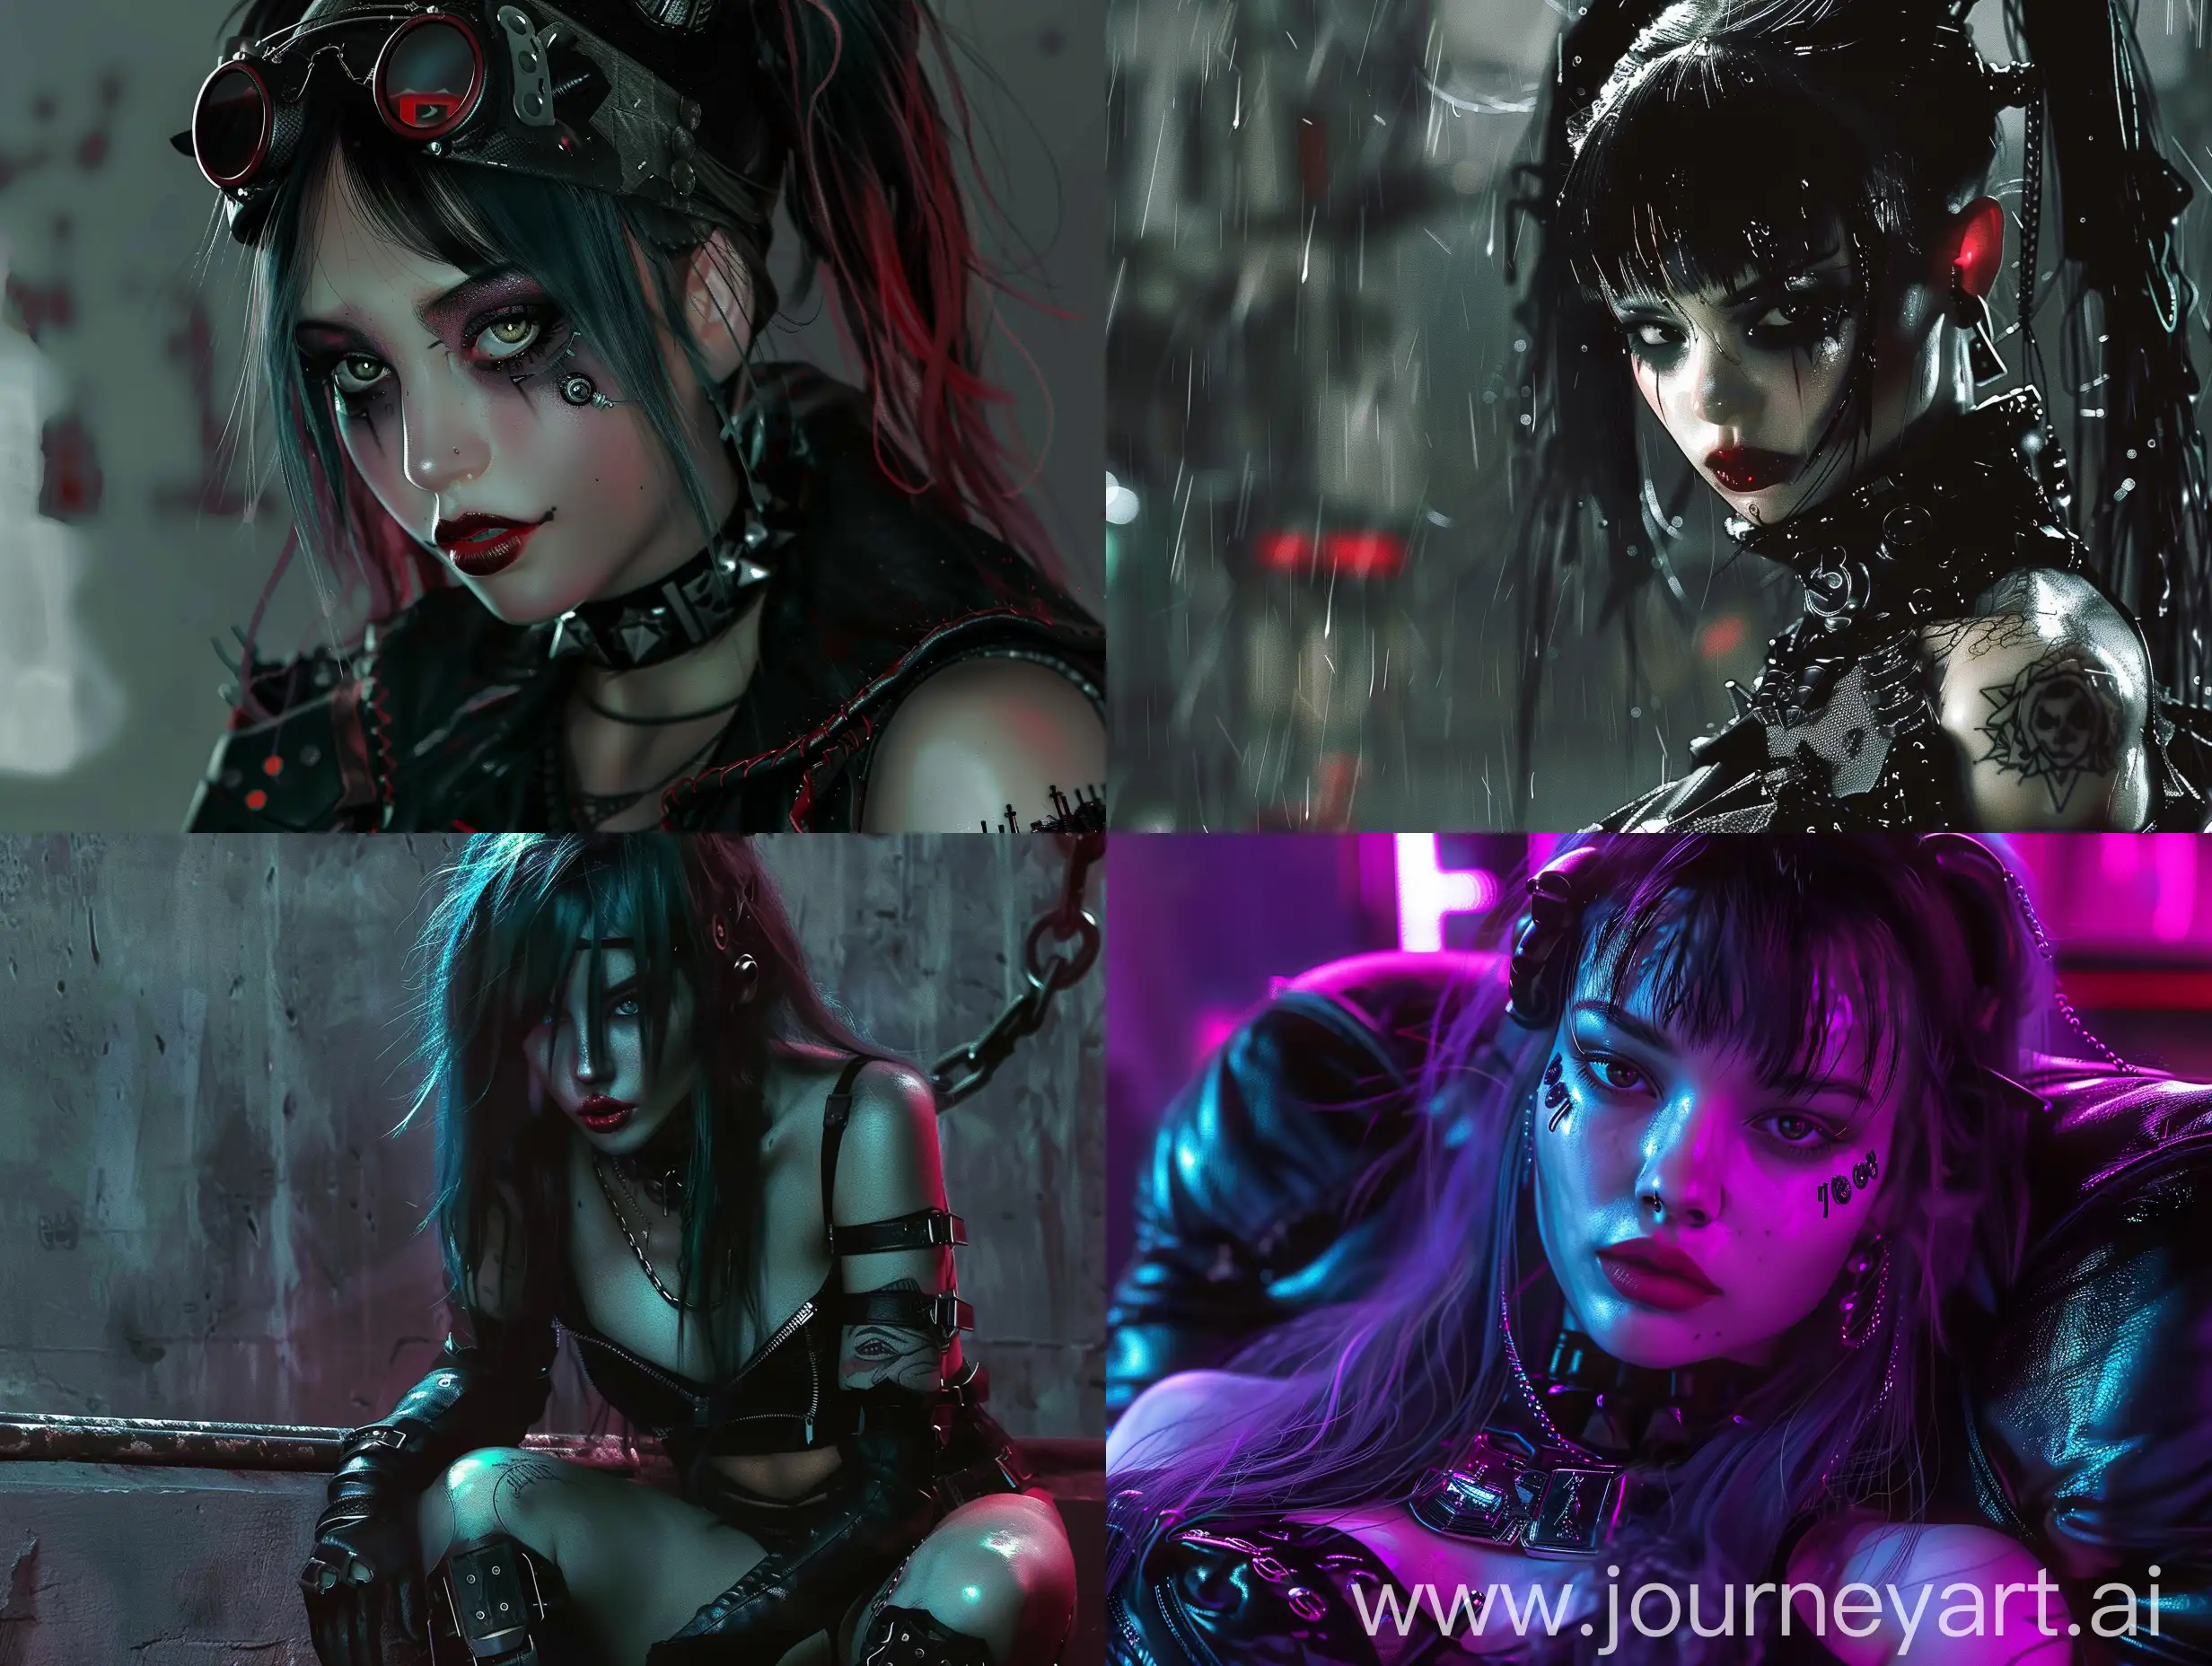 A realistic goth cyberpunk pinup girl wallpaper with dark colors.